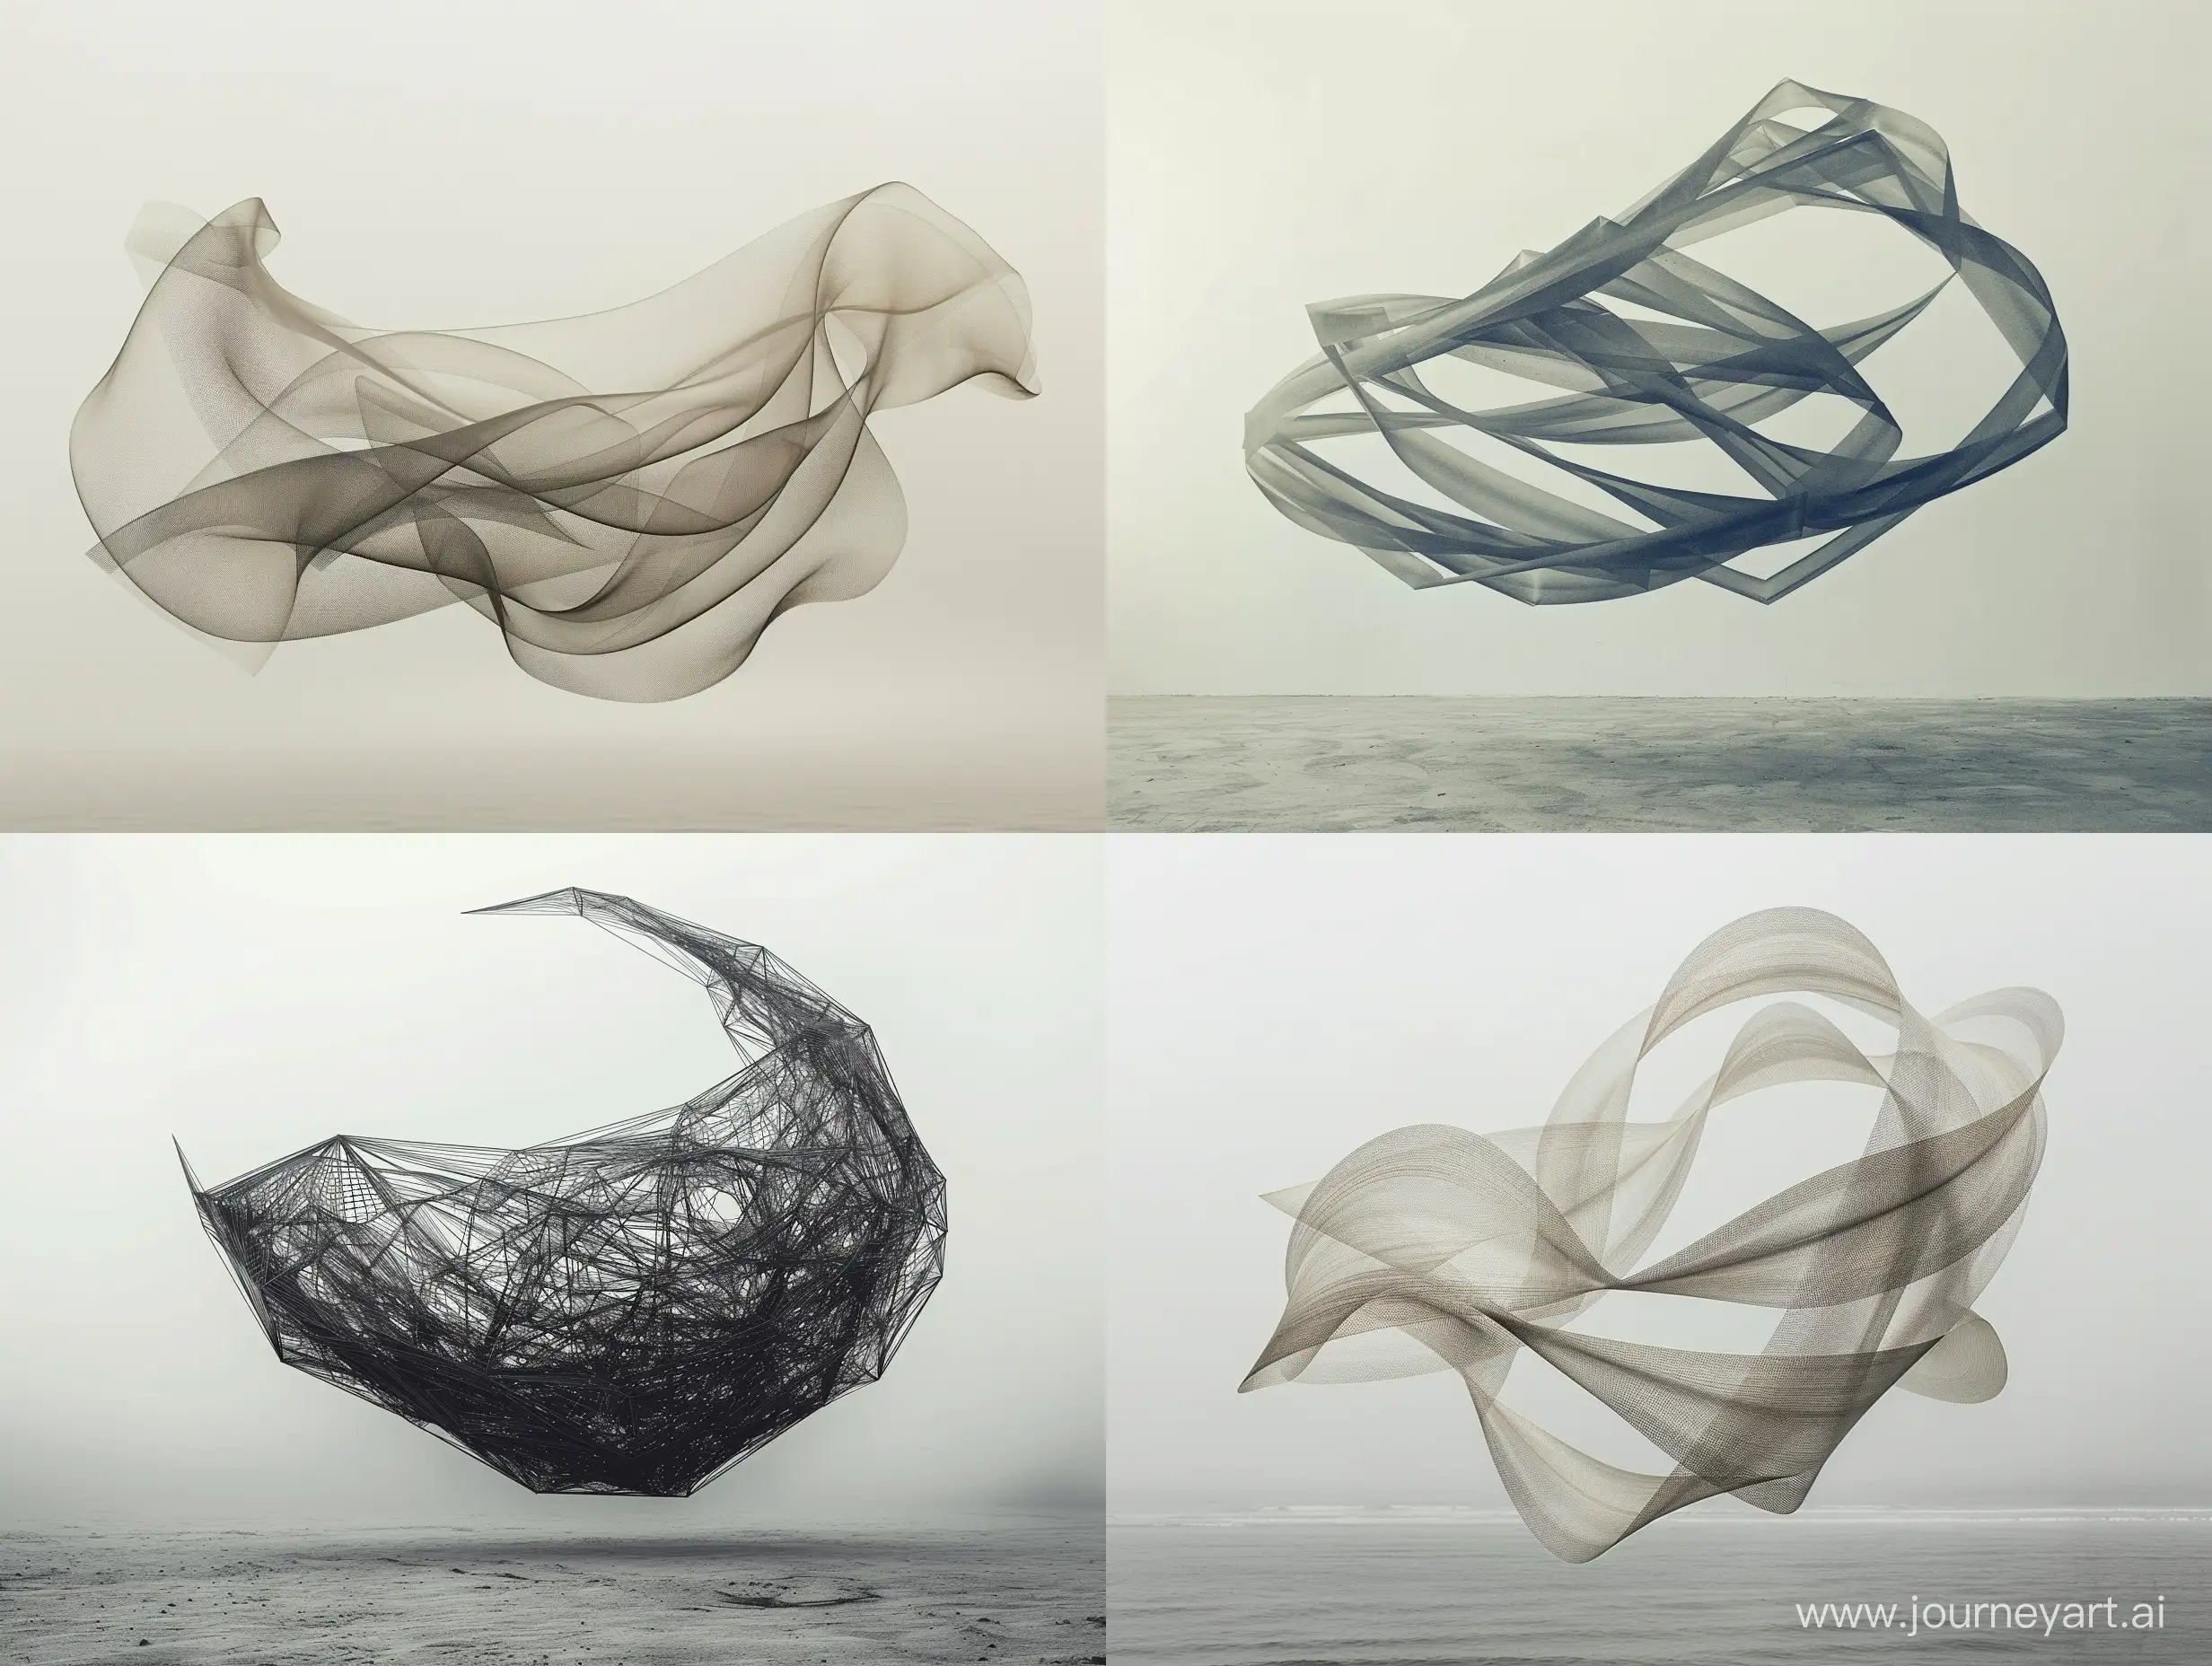 Ethereal-Monochrome-Sculpture-Floating-Gracefully